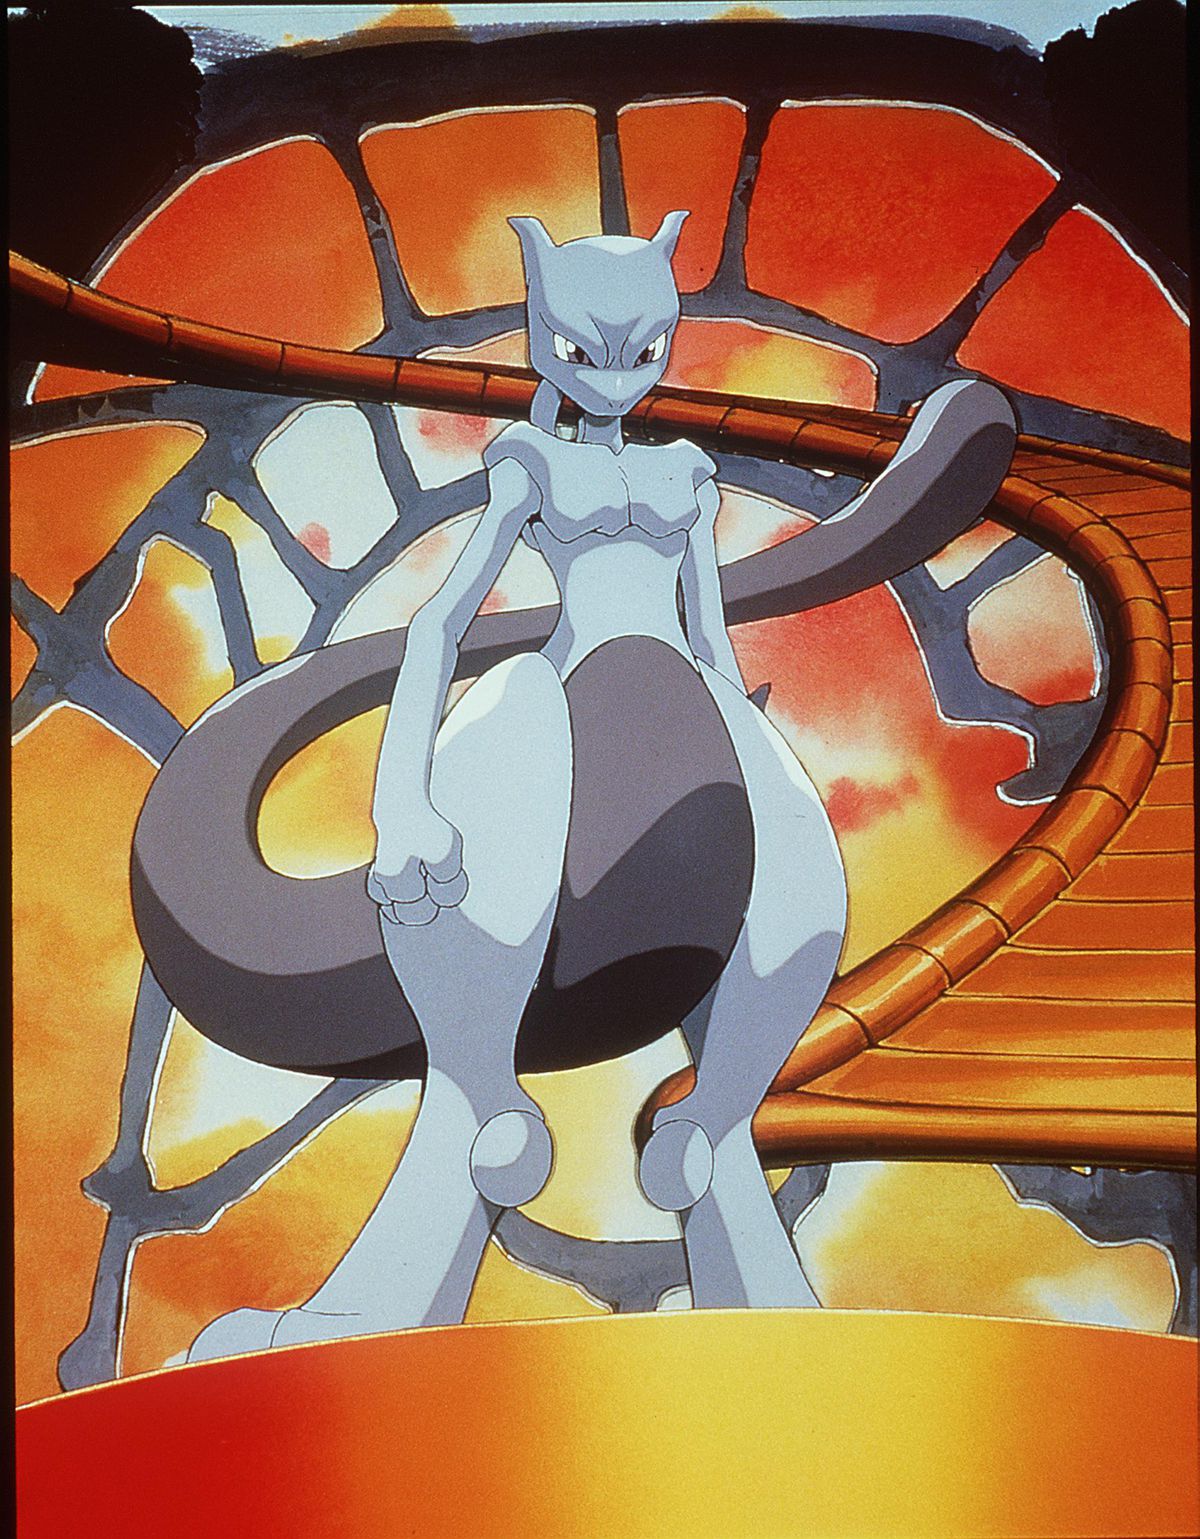 Mewtwo In The Animated Movie Pokemon:The First Movie Photo Pikachu Projects